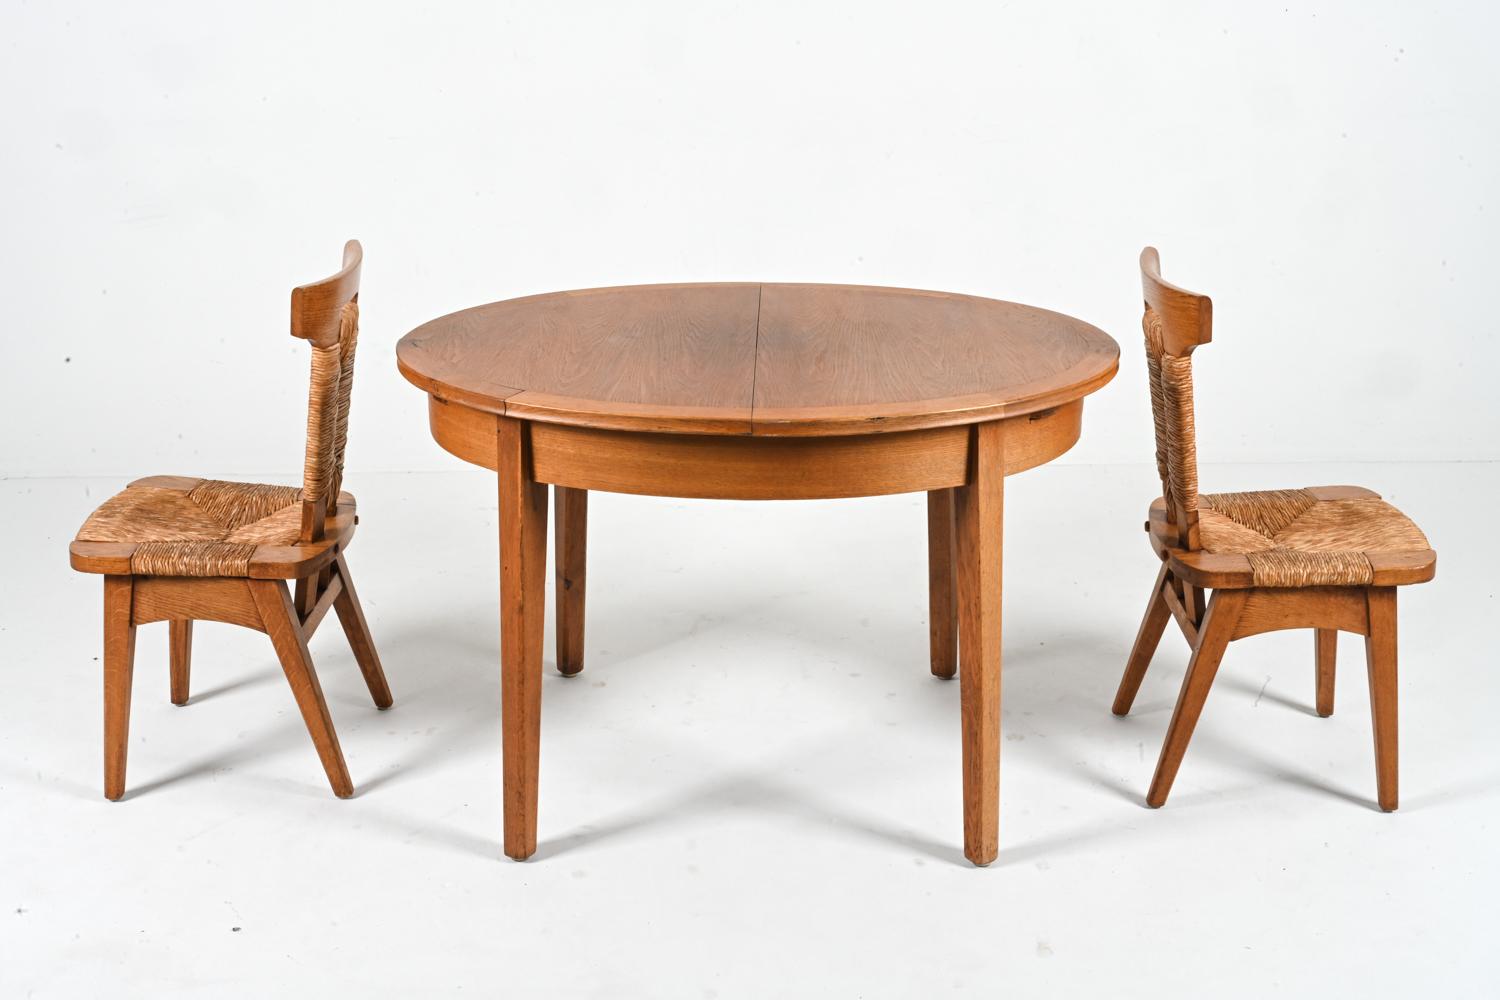 W. Kuyper Dutch Arts & Crafts Dining Suite in Oak & Rush, c. 1920s For Sale 7